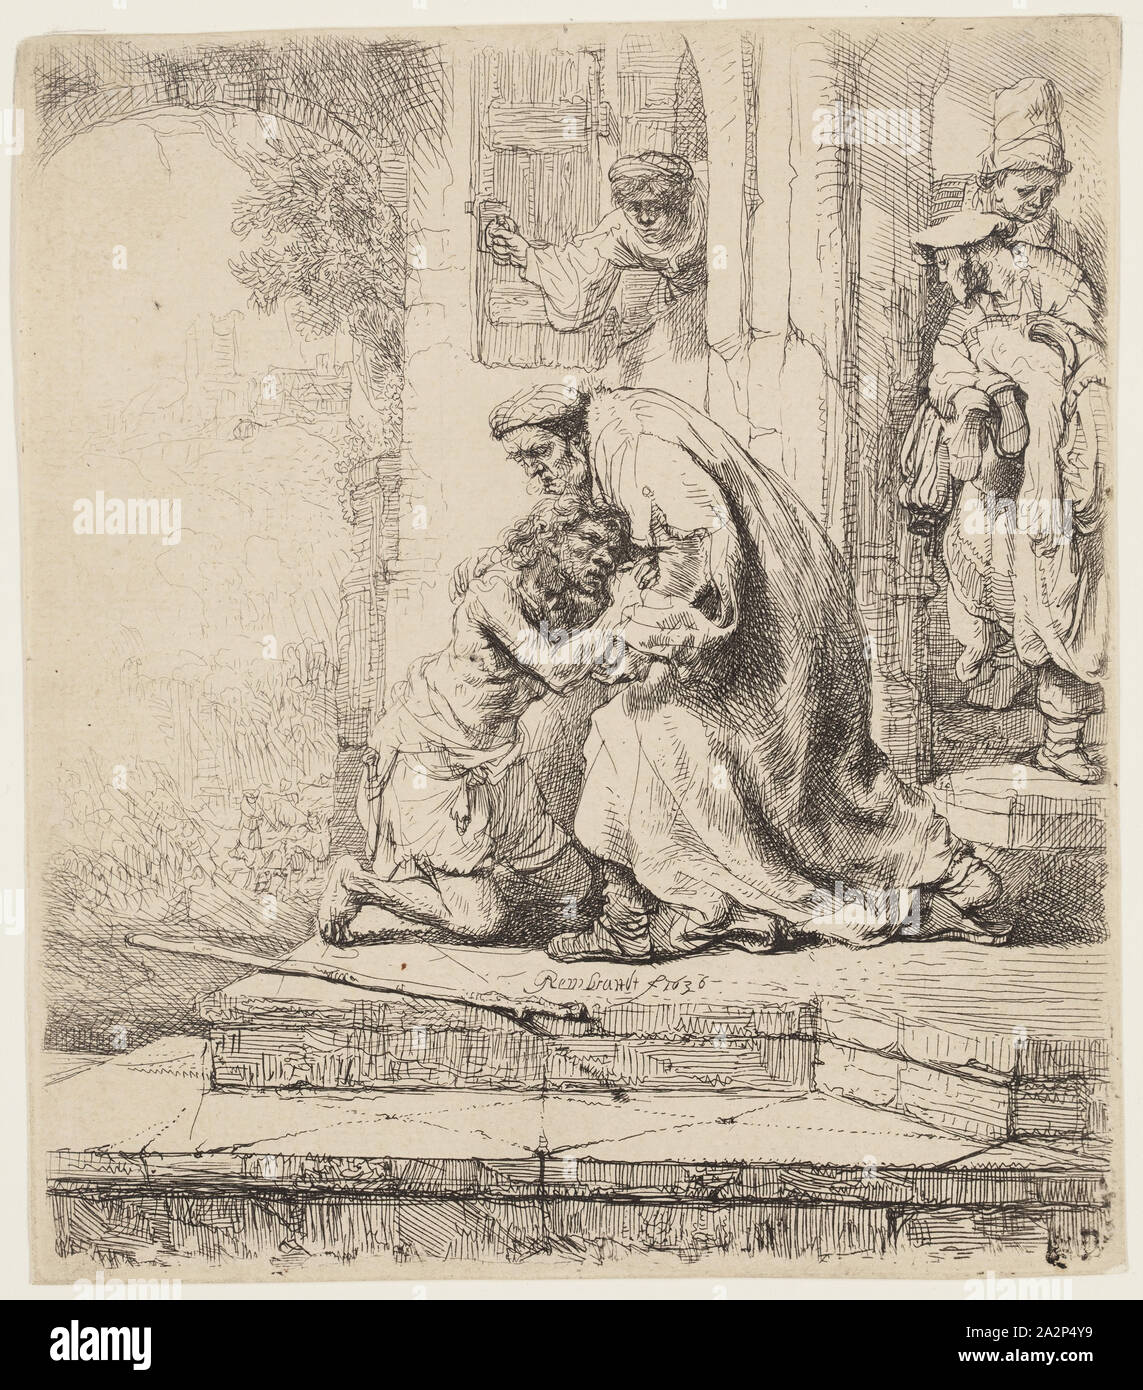 Rembrandt Harmensz van Rijn, Dutch, 1606-1669, Return of the Prodigal Son, 1636, etching printed in black ink on laid paper, Plate: 6 1/8 × 5 3/8 inches (15.6 × 13.7 cm Stock Photo